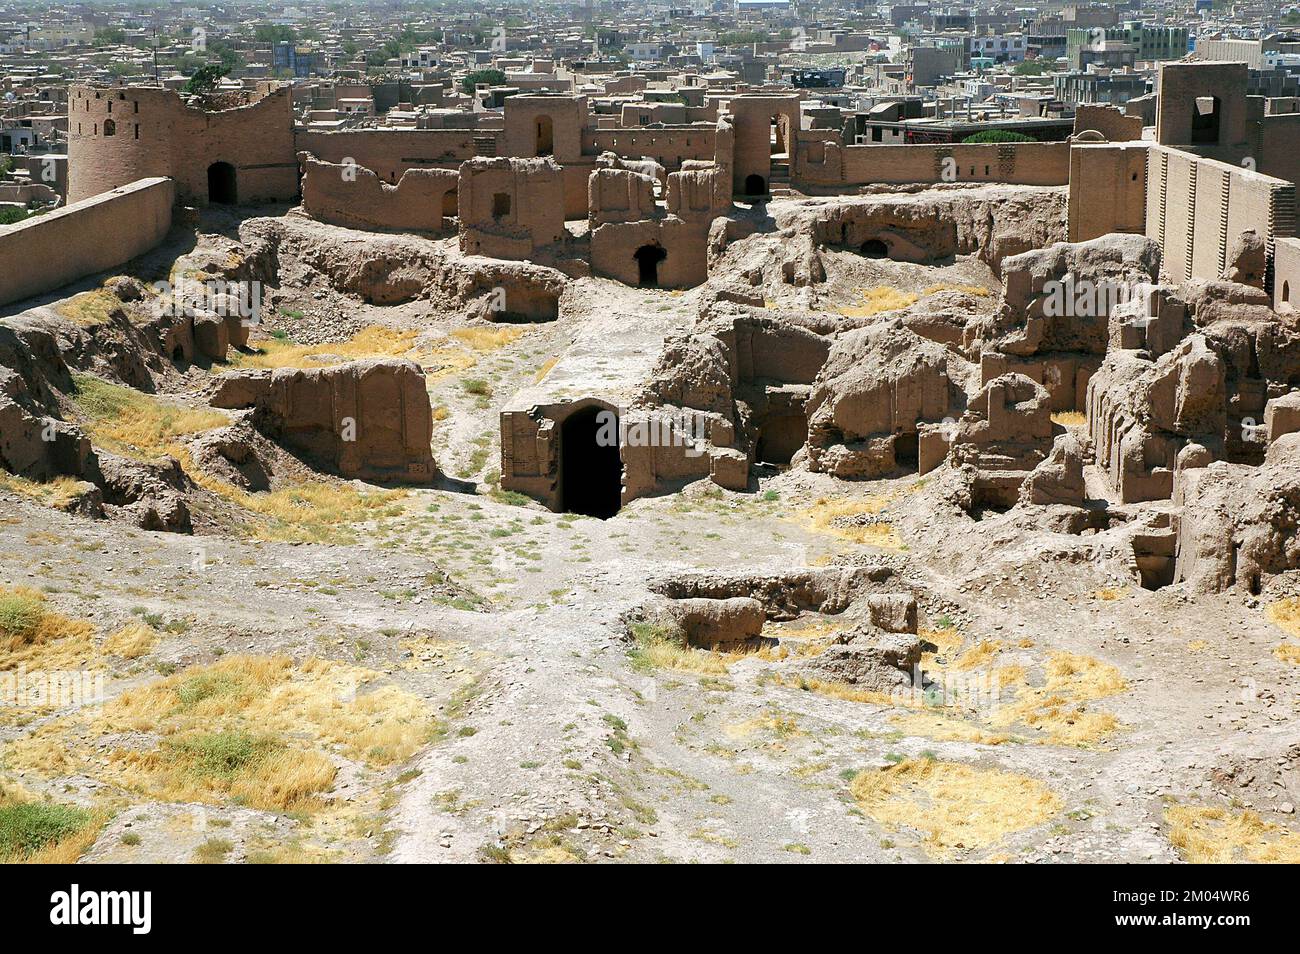 Herat Citadel in Herat, Afghanistan. The fort dates back to the 15th century. Unrestored courtyard before a renovation completed in 2011. Stock Photo